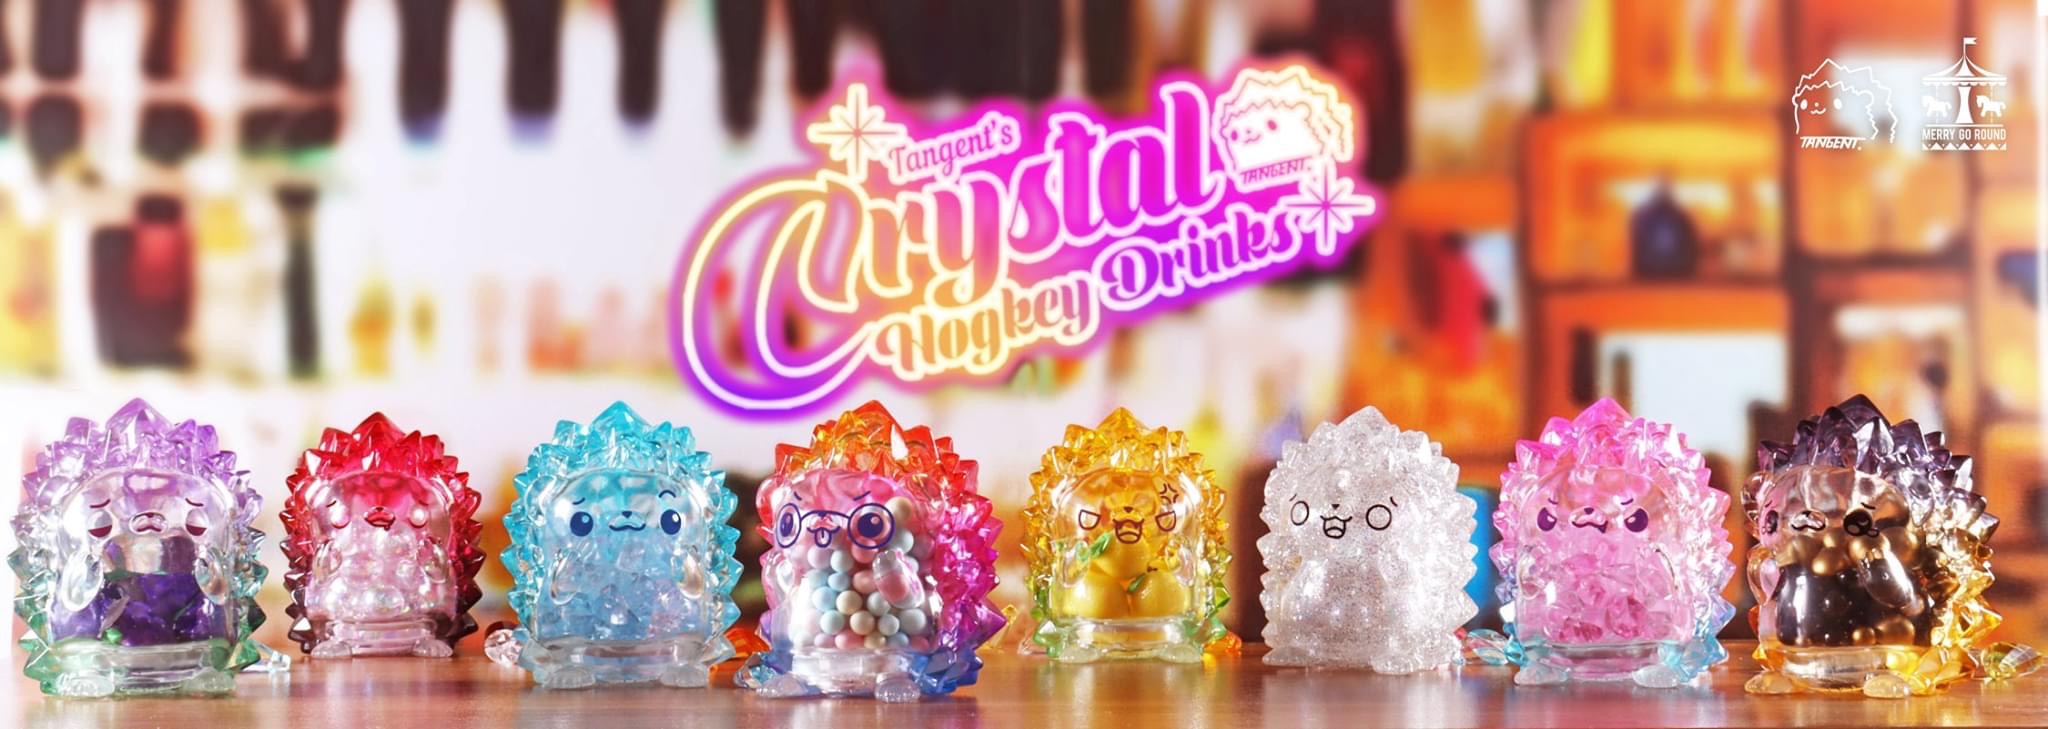 Plastic toy figures from Tangent Crystal Hogkey Drinks Blindbox Series, including basic characters and a chase character, with sizes and materials detailed in the product description.